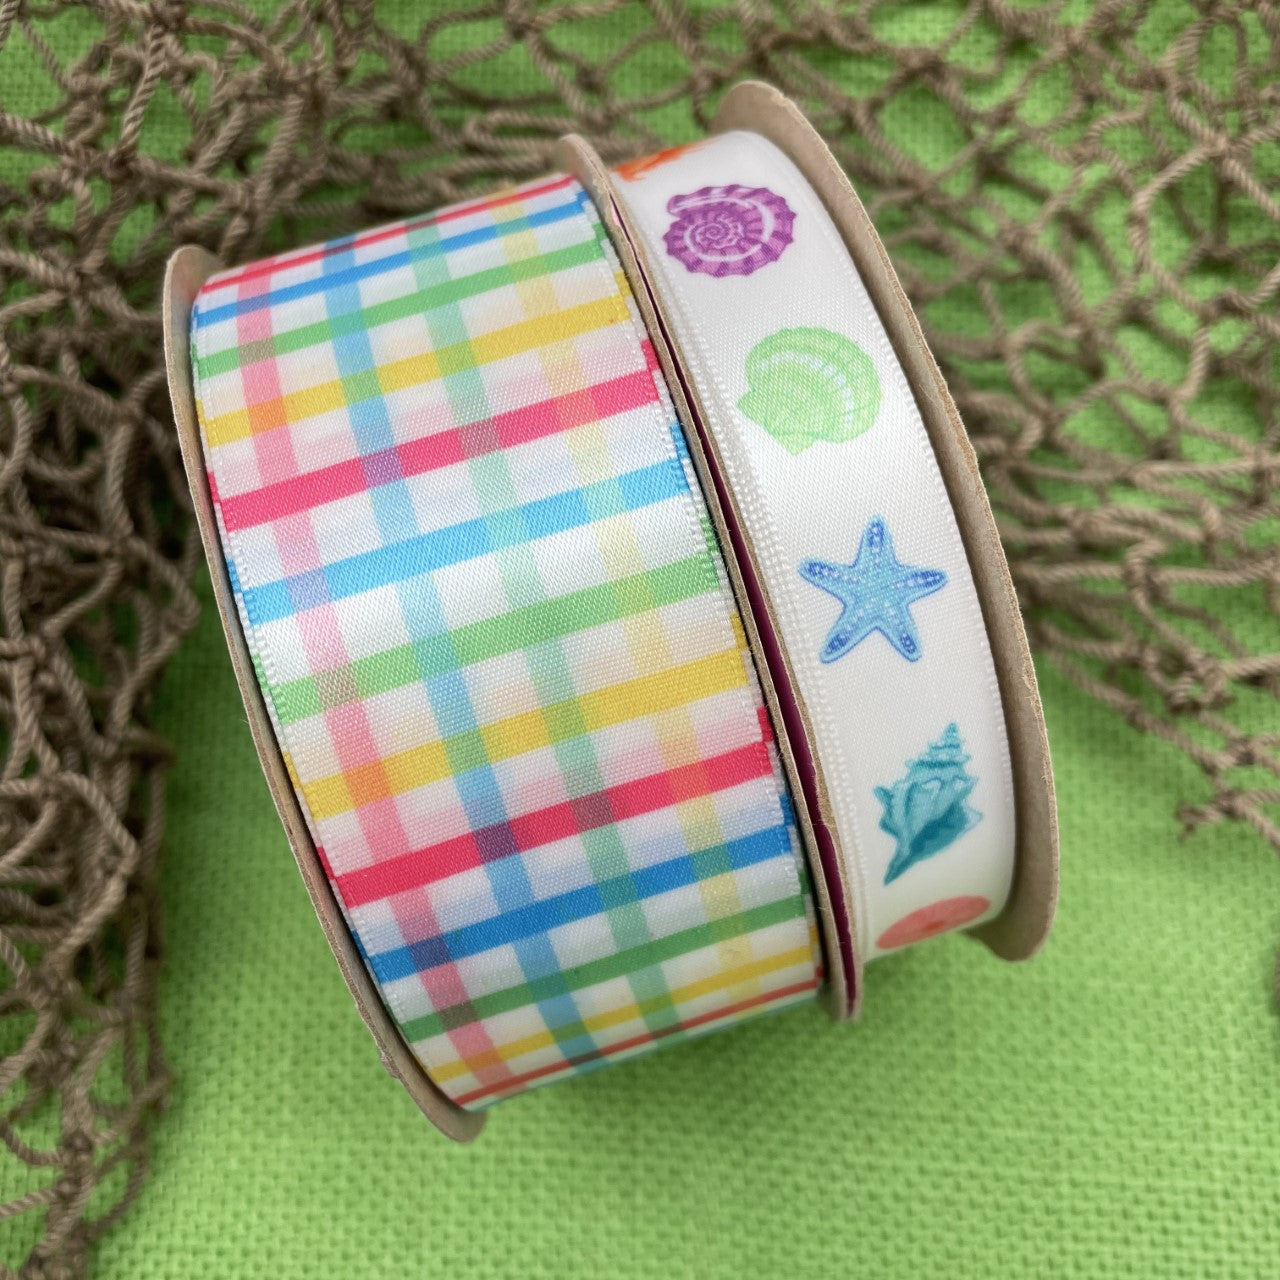 Mix and match our shells with this pretty Spring plaid for a fun party look!